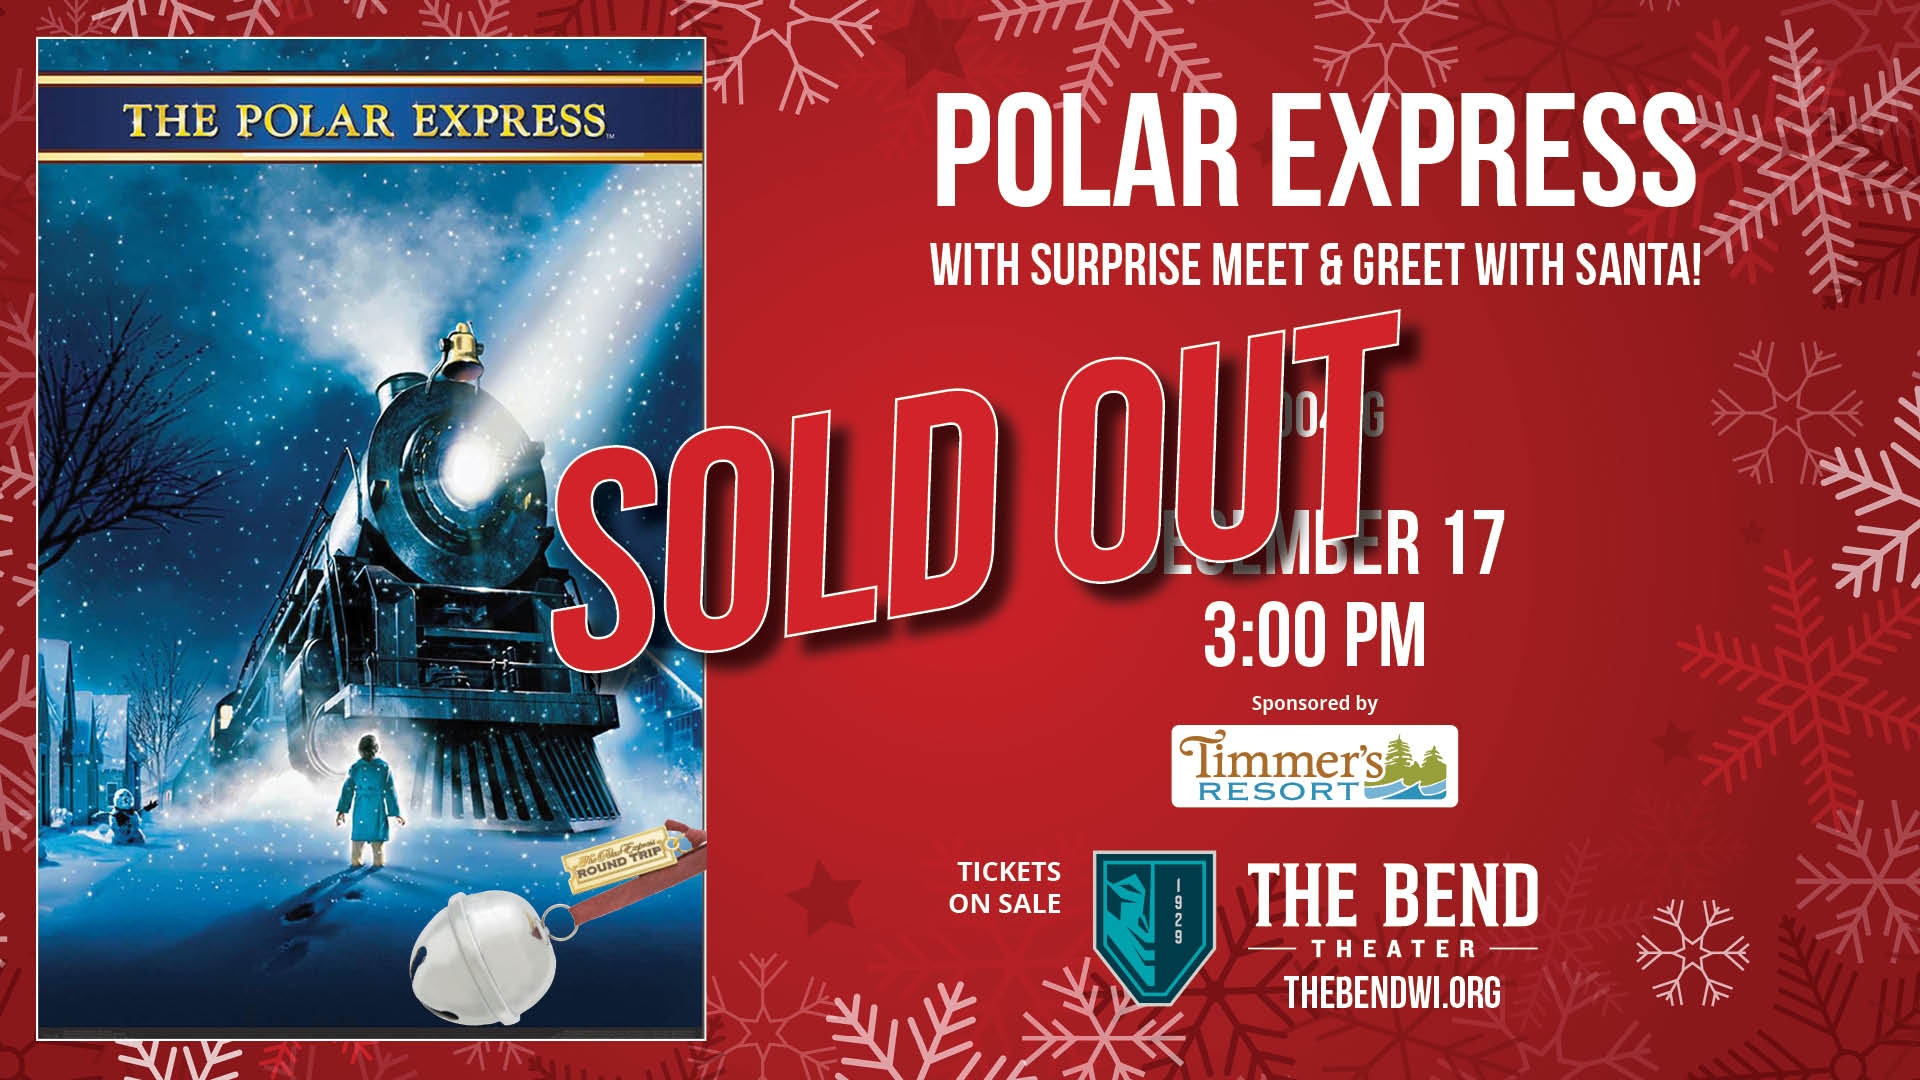 Holiday Classics: The Polar Express (2004 - G) including a "Surprise" Meet & Greet with Santa Claus